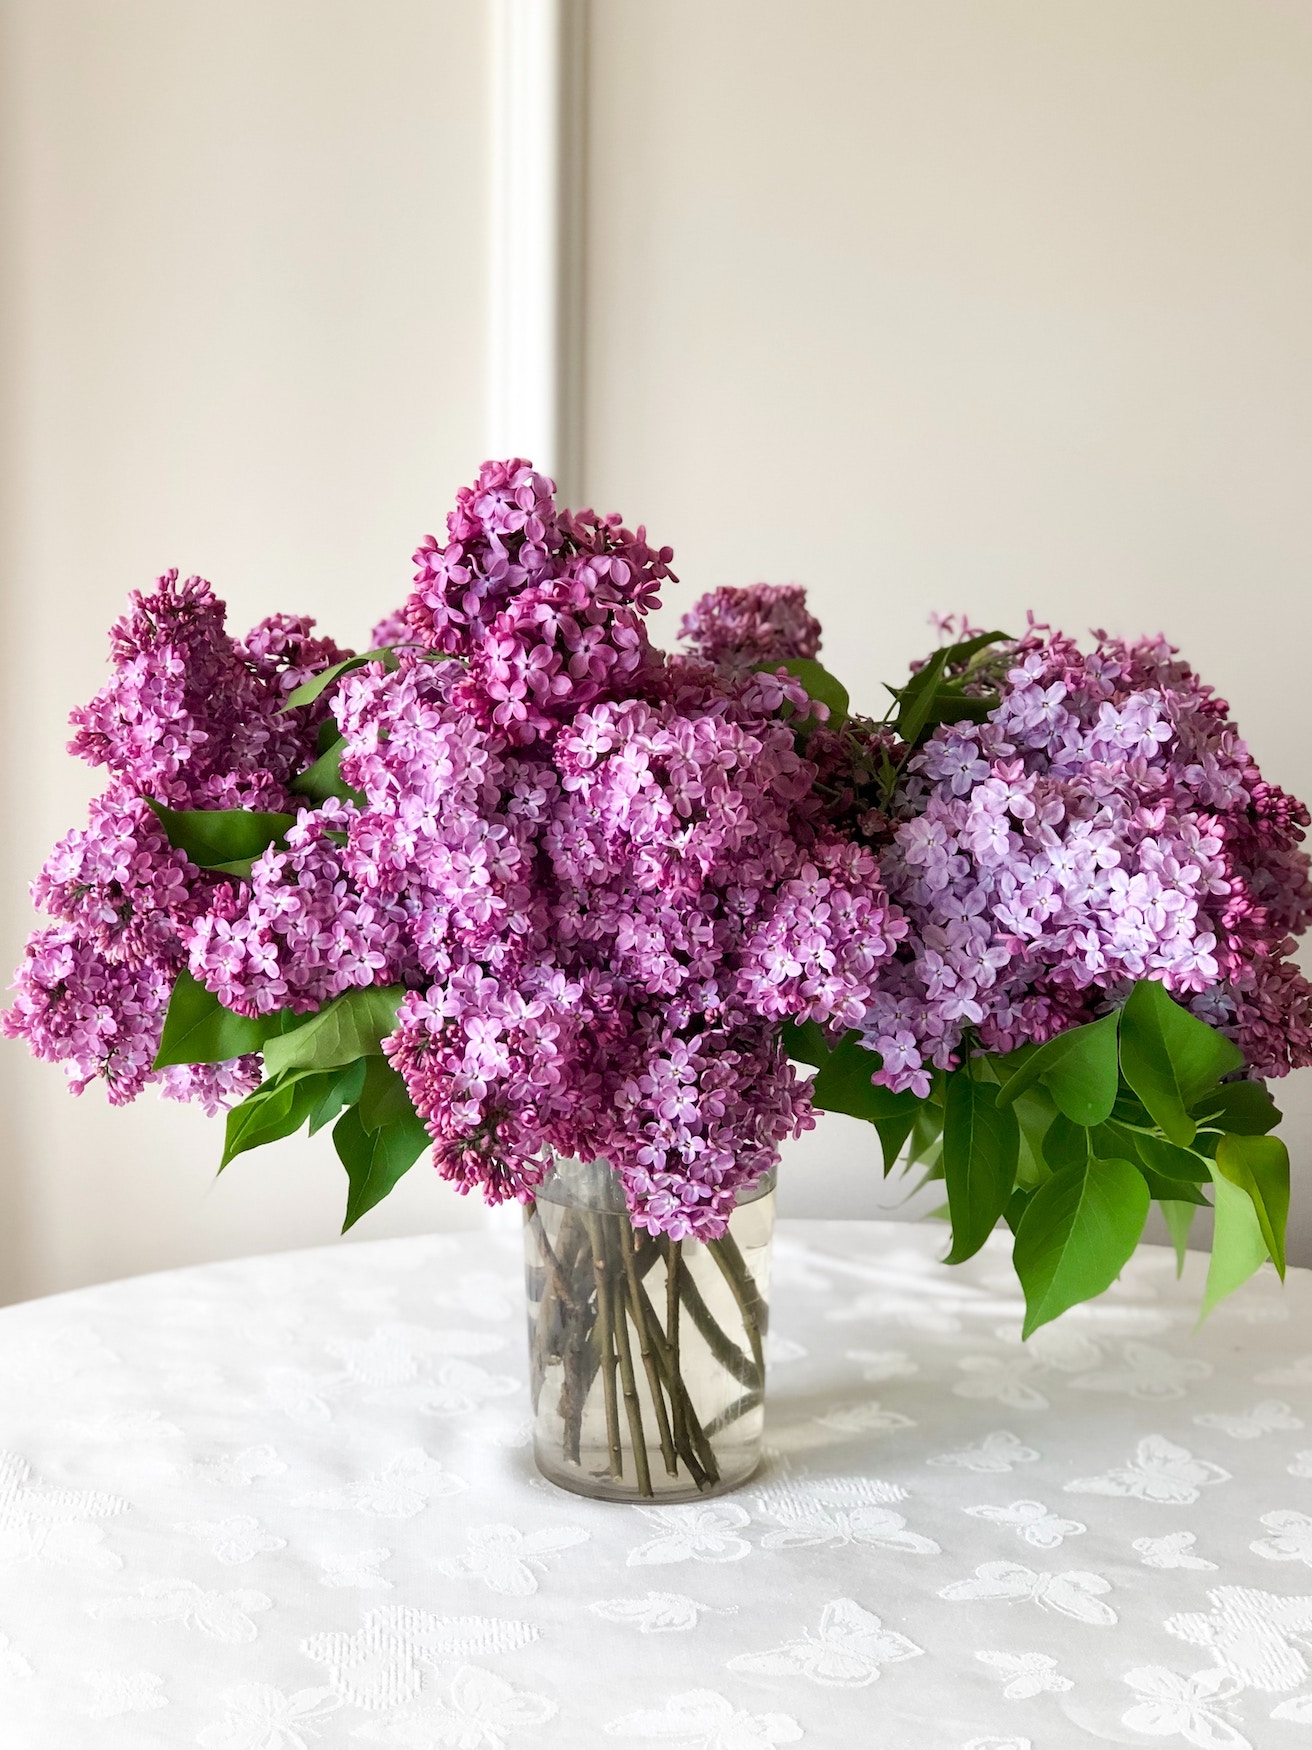 The last lilac arrangement for a dying mother-in-law